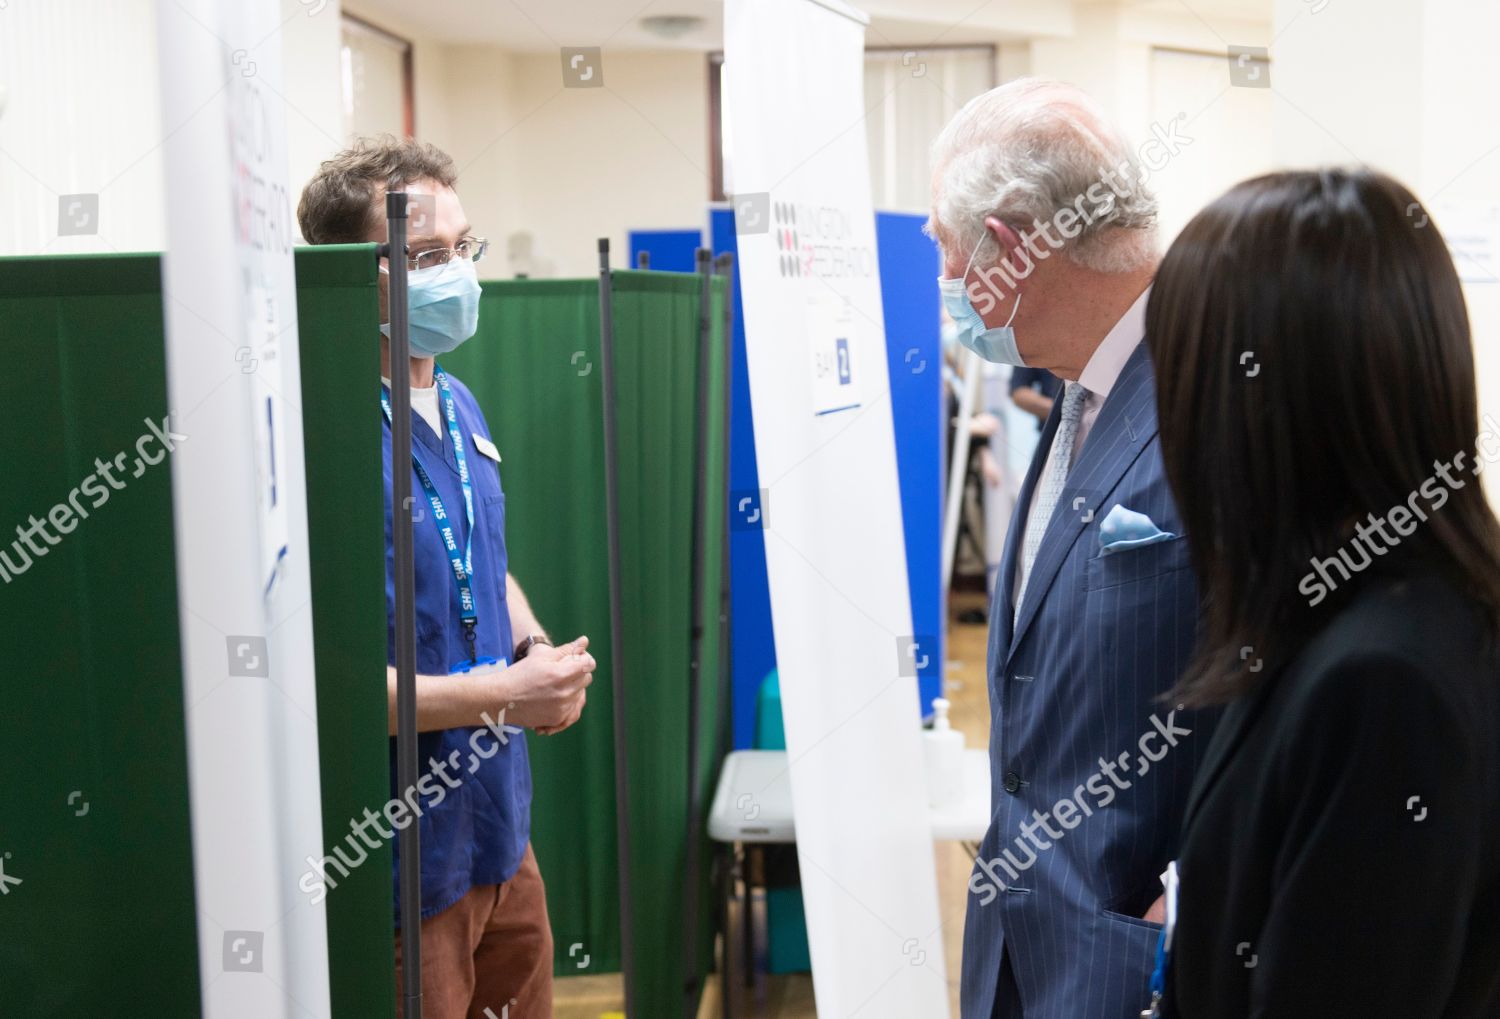 prince-charles-and-camilla-duchess-of-cornwall-visit-vaccination-pop-up-centre-at-finsbury-park-mosque-london-uk-shutterstock-editorial-11802378af.jpg